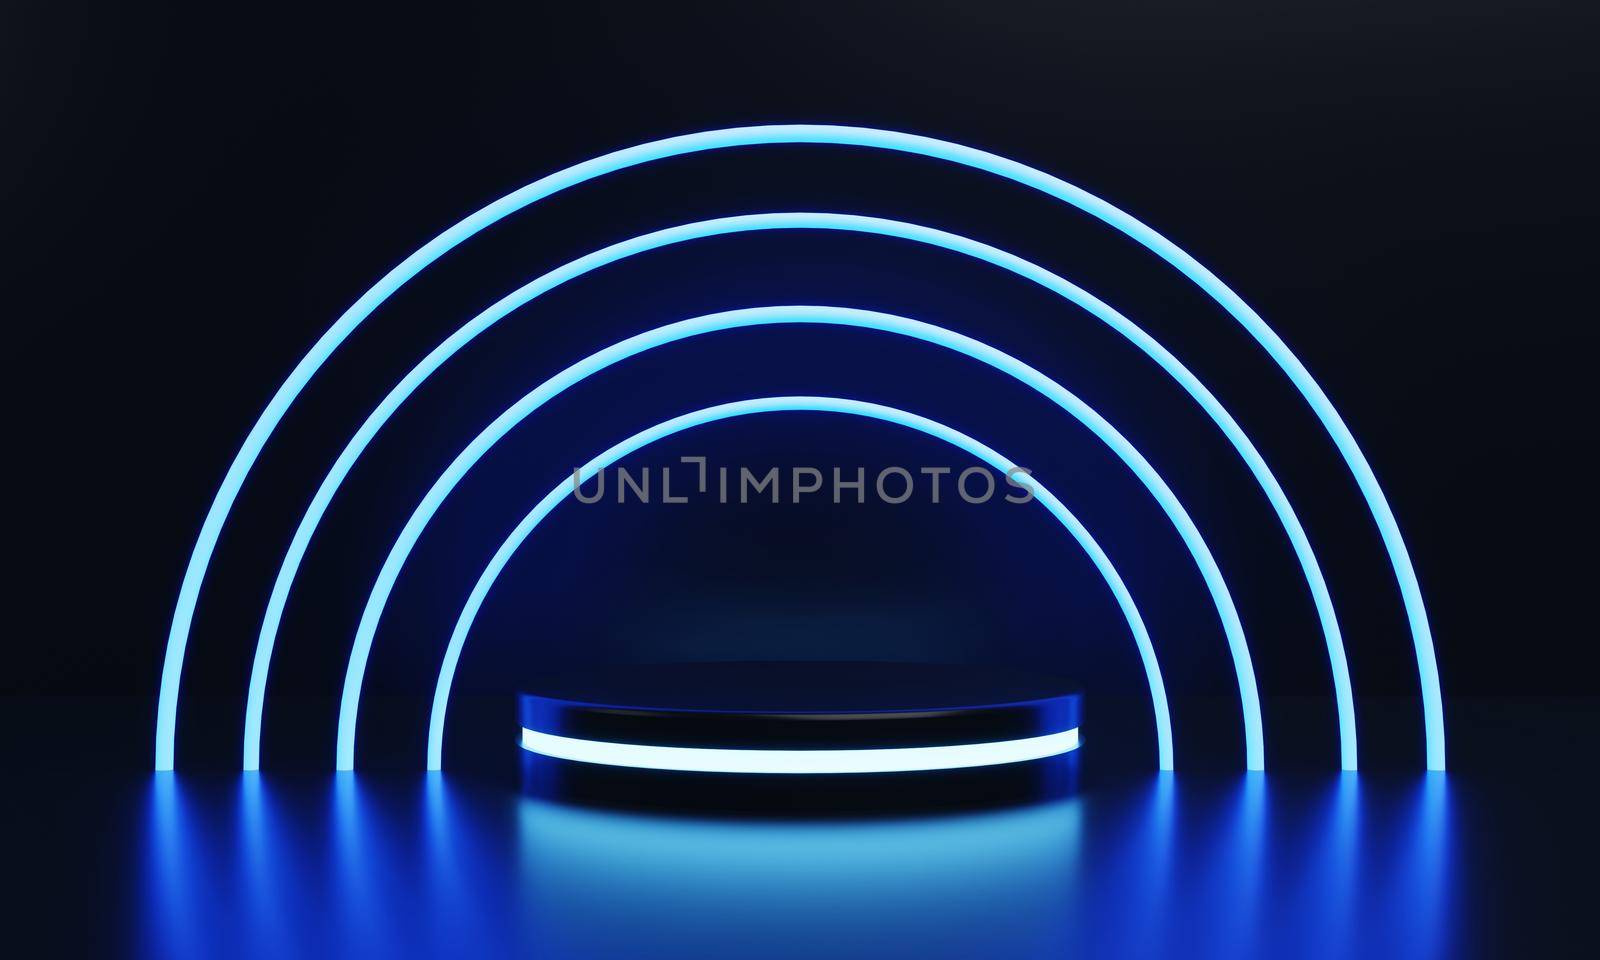 Modern round product showcase sci-fi podium with blue glowing light neon ring frame background. Technology and object concept. 3D illustration rendering by MiniStocker